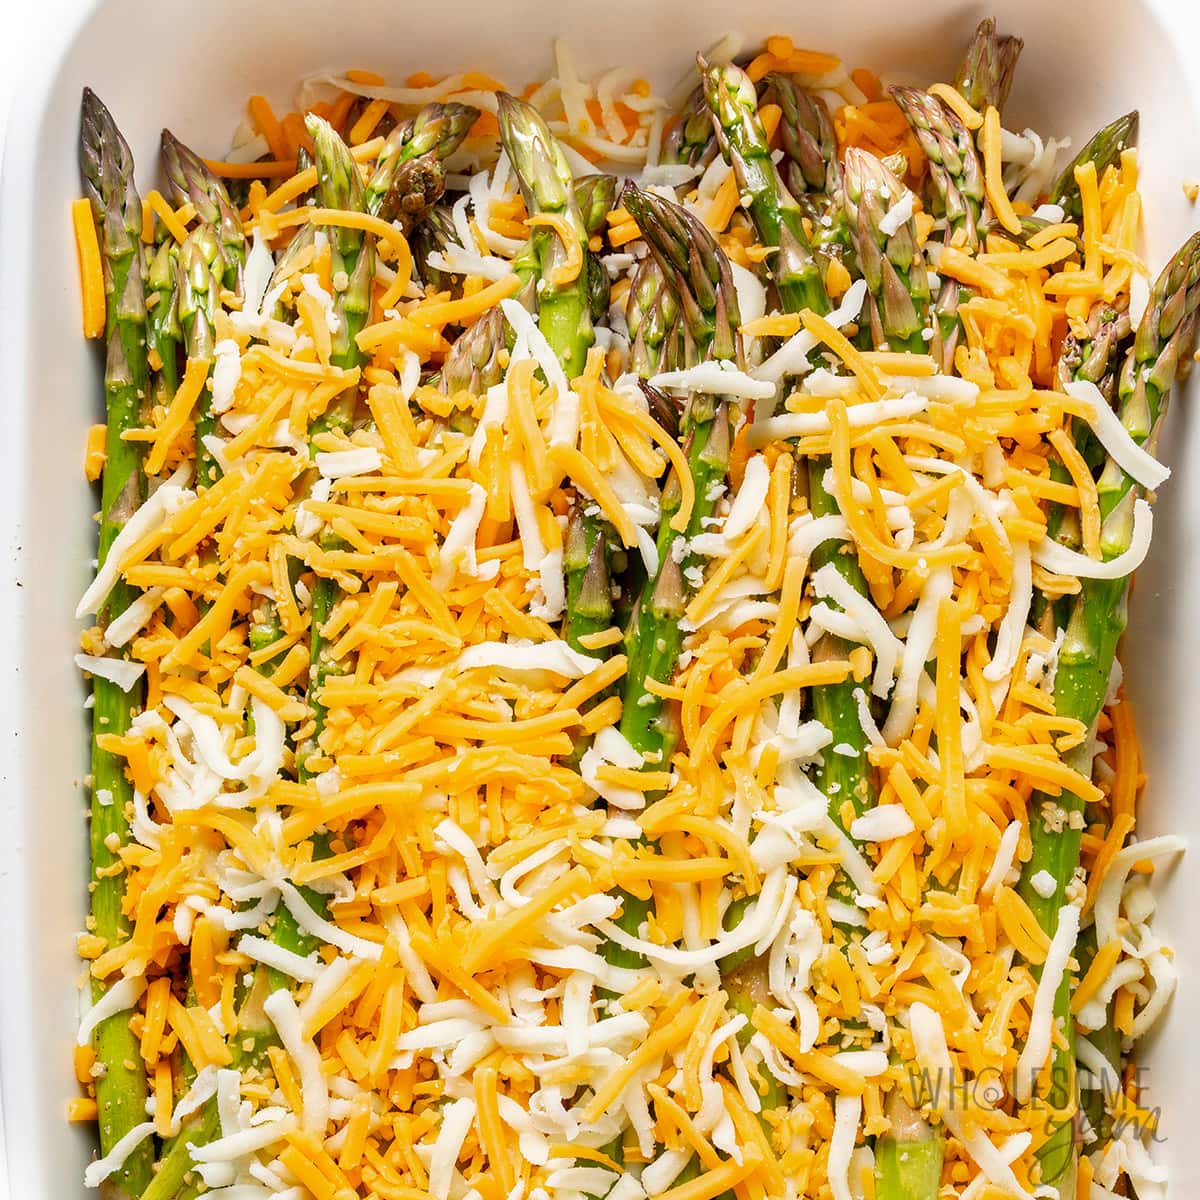 Layers of veggies and cheese in a baking dish.